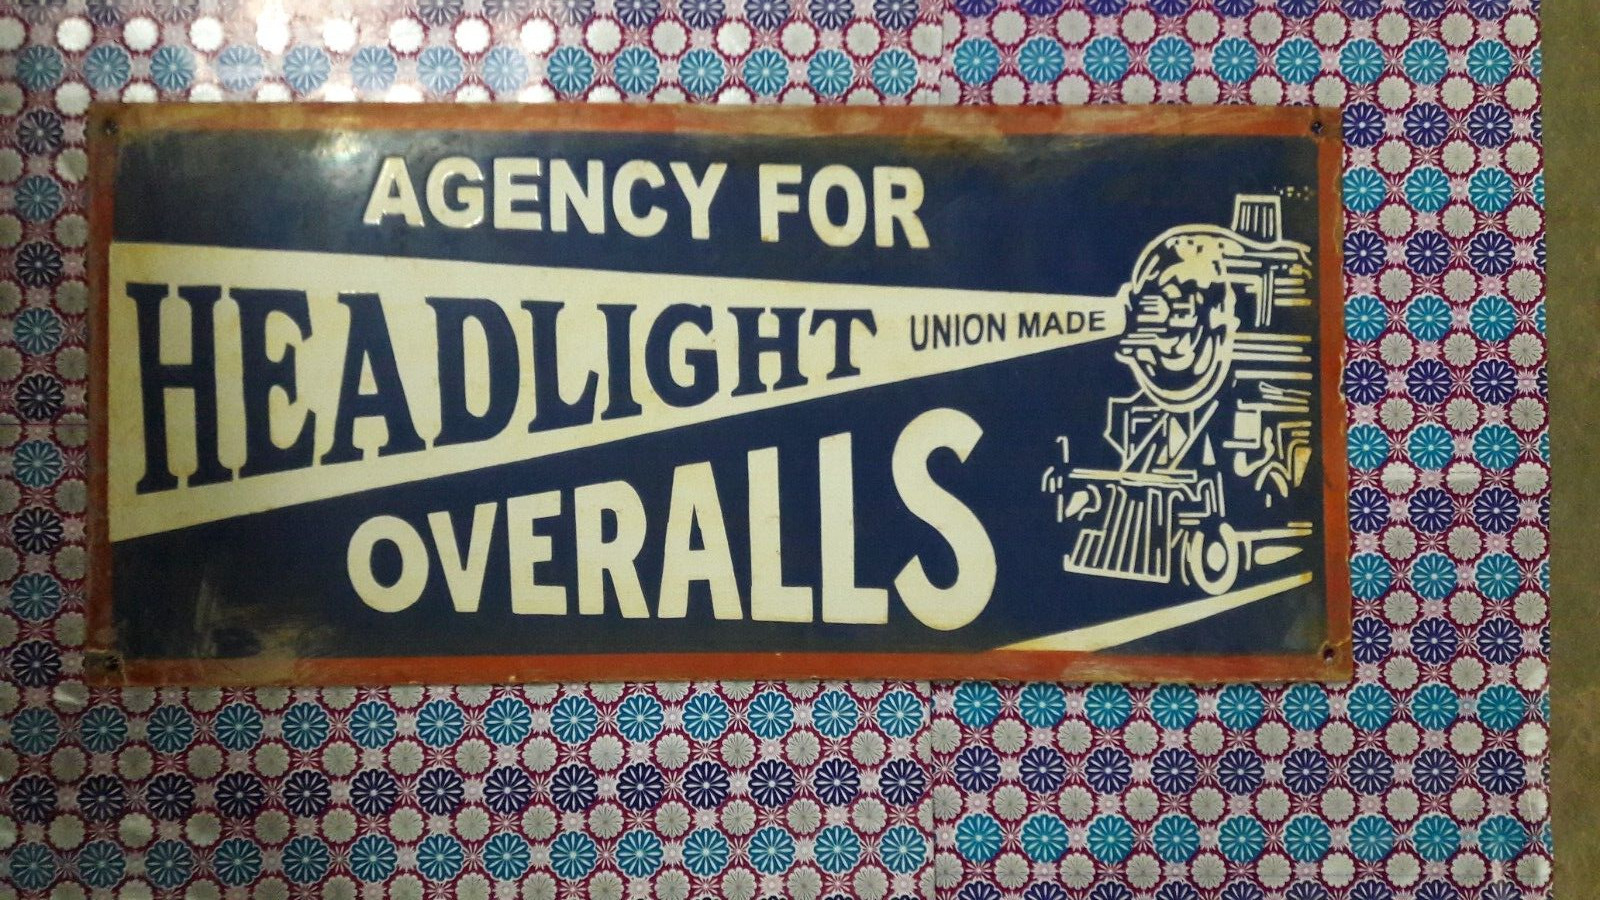 PORCELAIN UNION MADE HEADLIGHT ENAMEL SIGN 36X18 INCHES